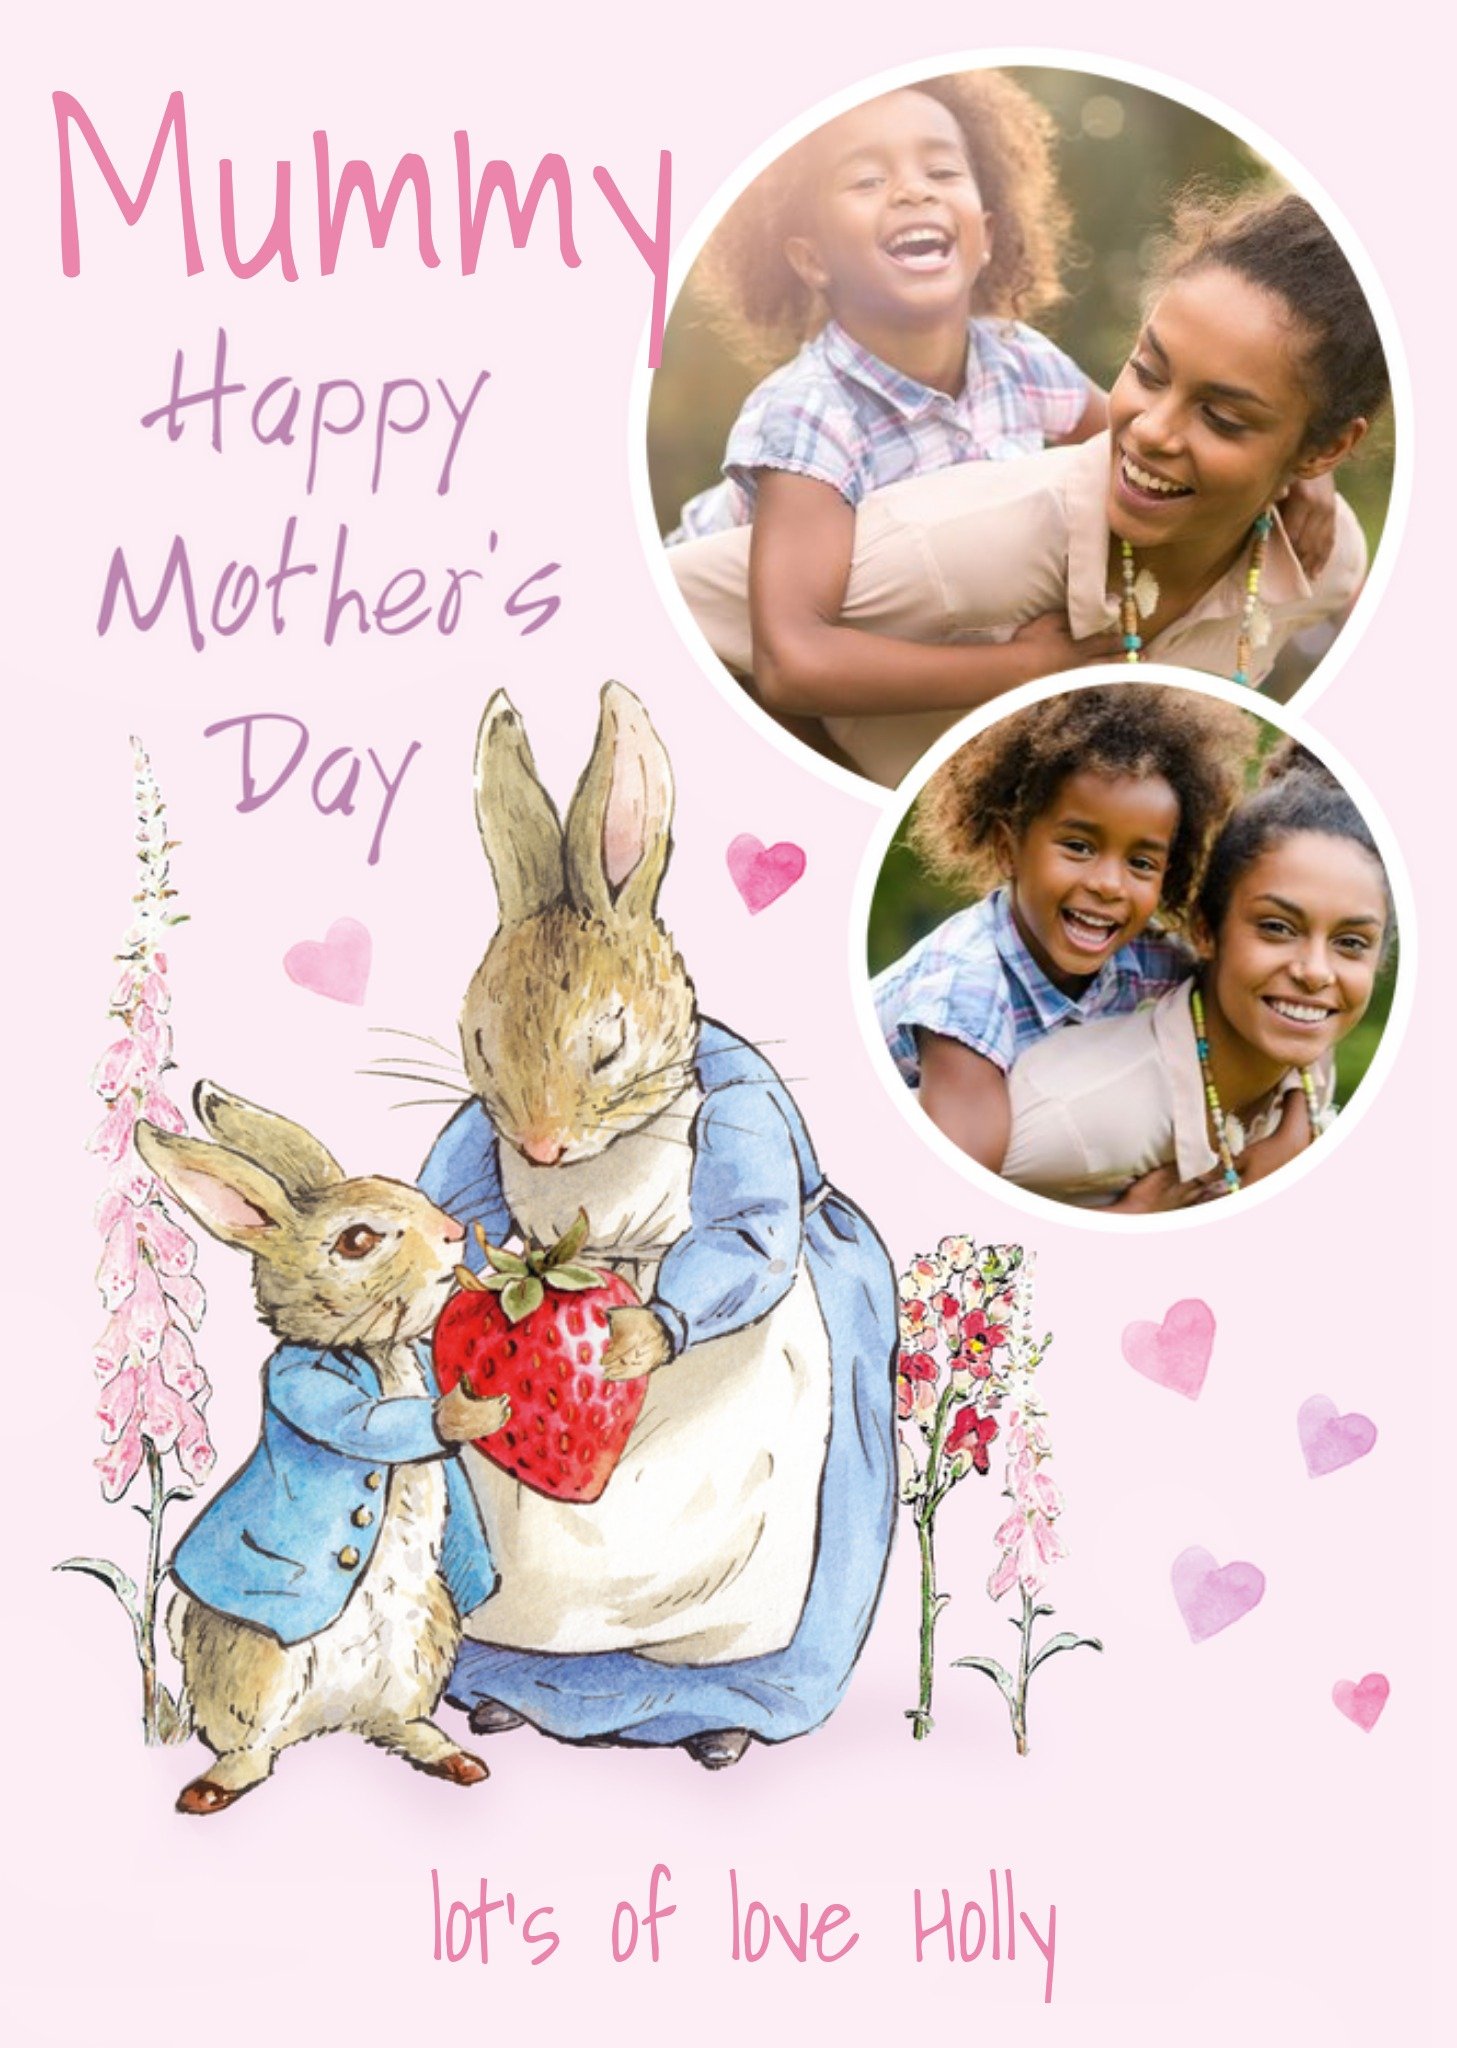 Peter Rabbit Wonderful Wife Happy Mothers Day Photo Upload Card Ecard